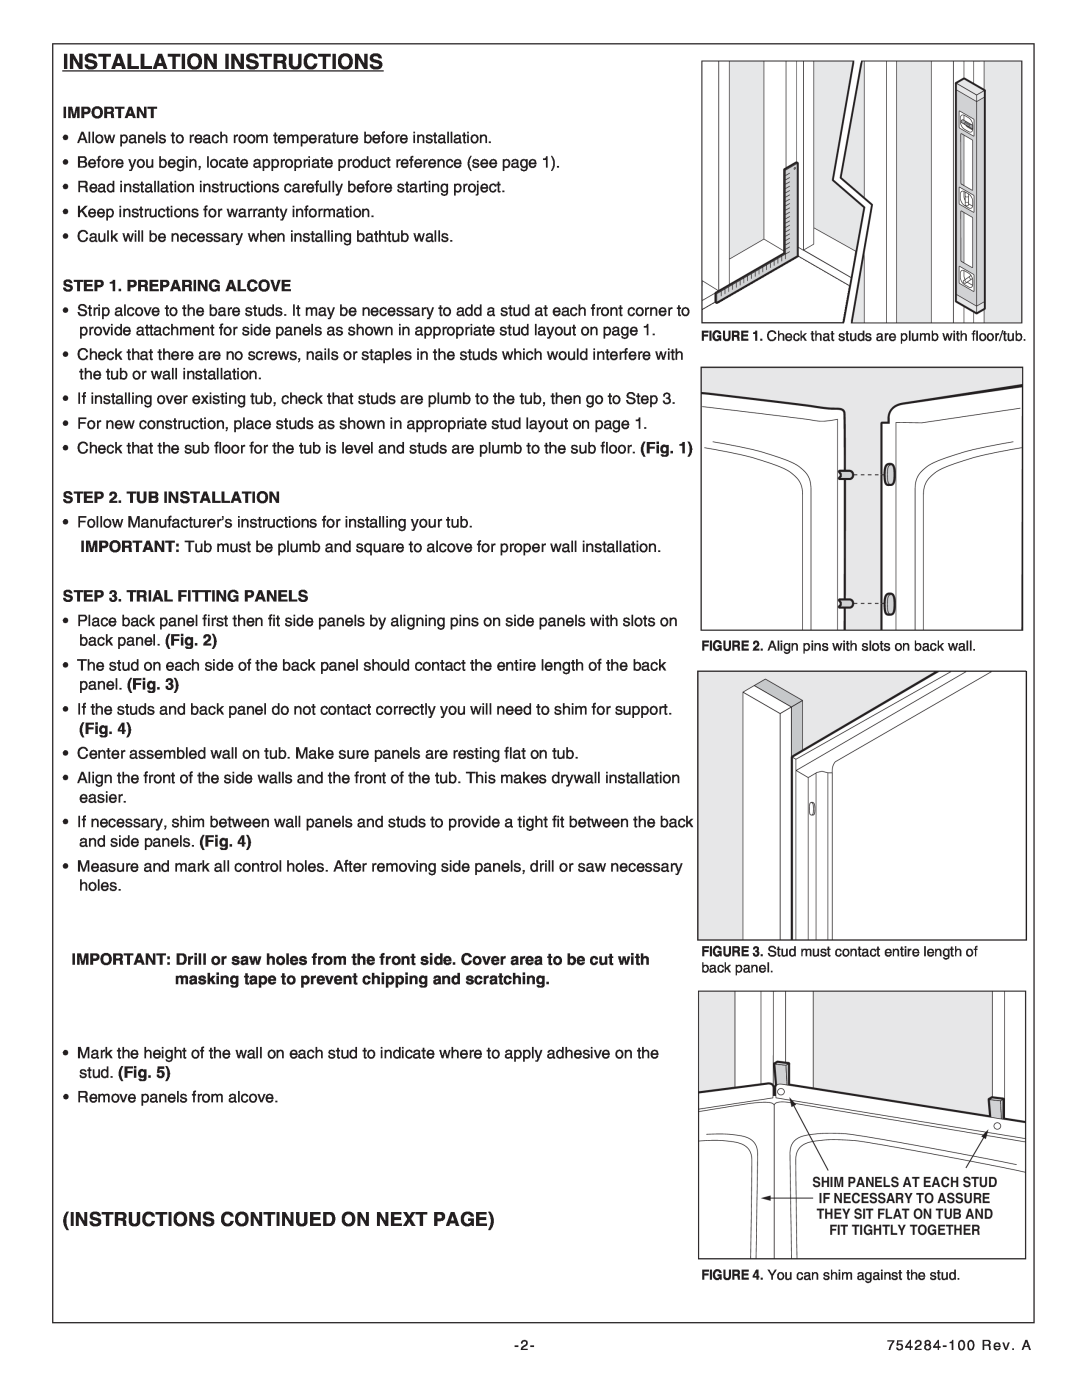 American Standard 6030Y1.BW.XXX Installation Instructions, Instructions Continued On Next Page, Preparing Alcove 